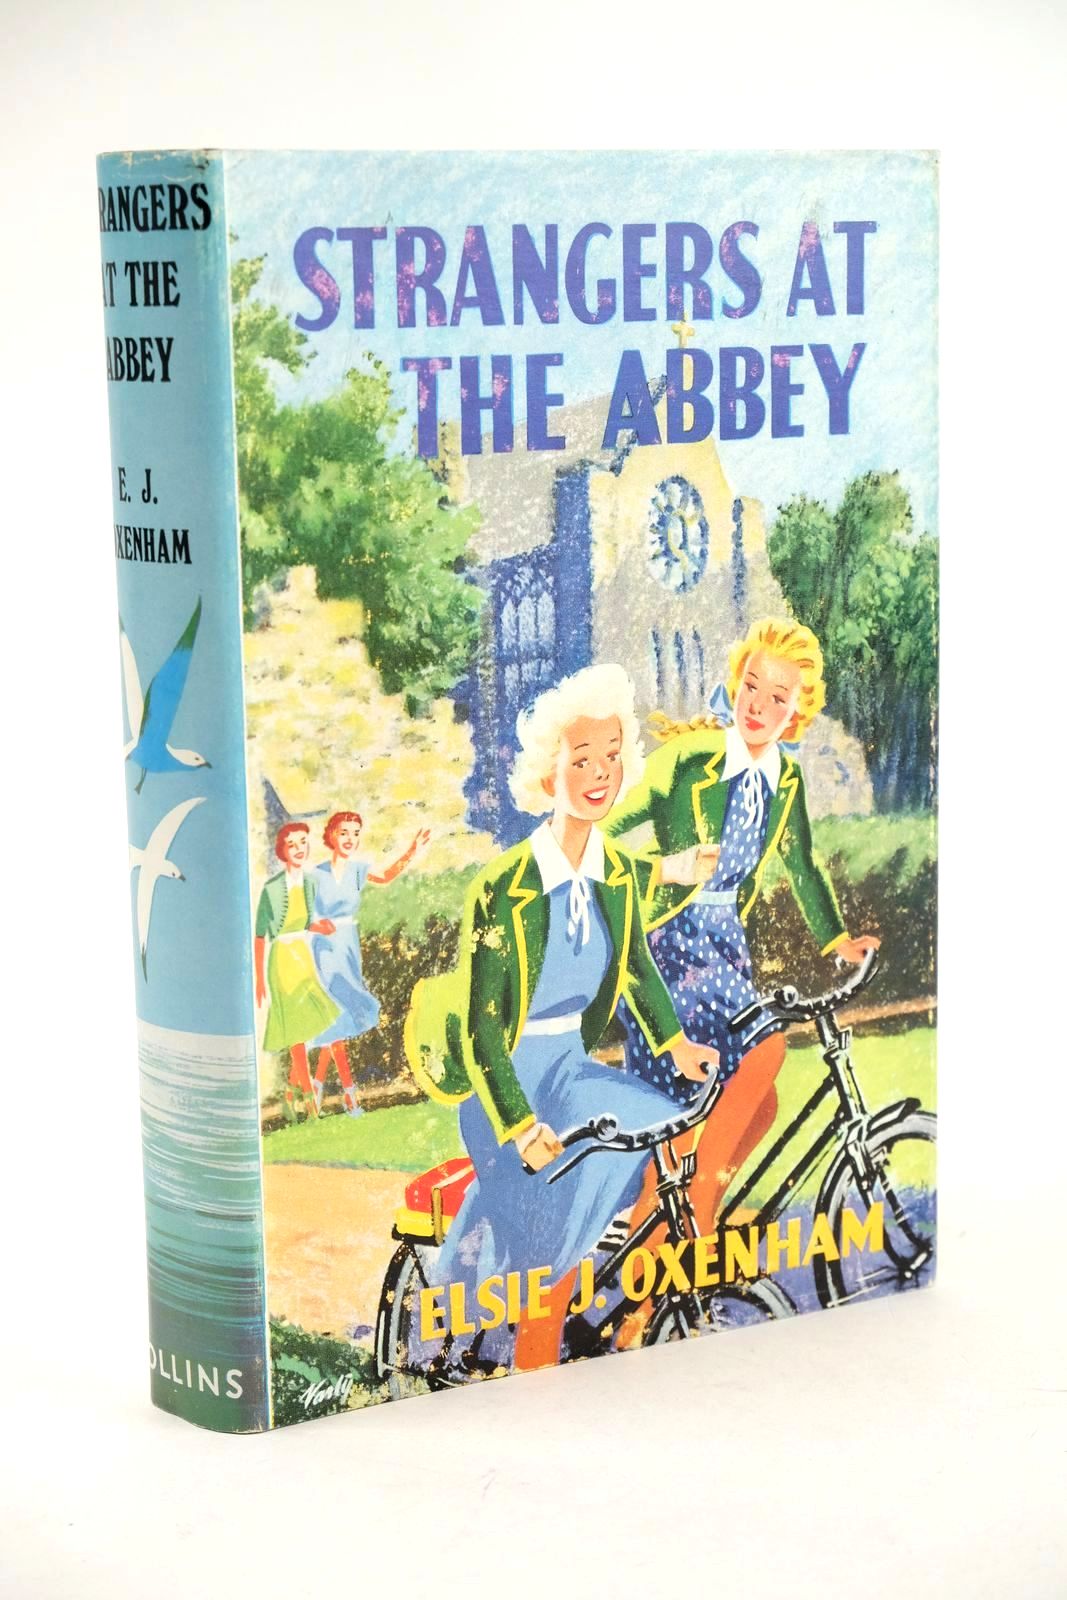 Photo of STRANGERS AT THE ABBEY written by Oxenham, Elsie J. published by Collins (STOCK CODE: 1324517)  for sale by Stella & Rose's Books